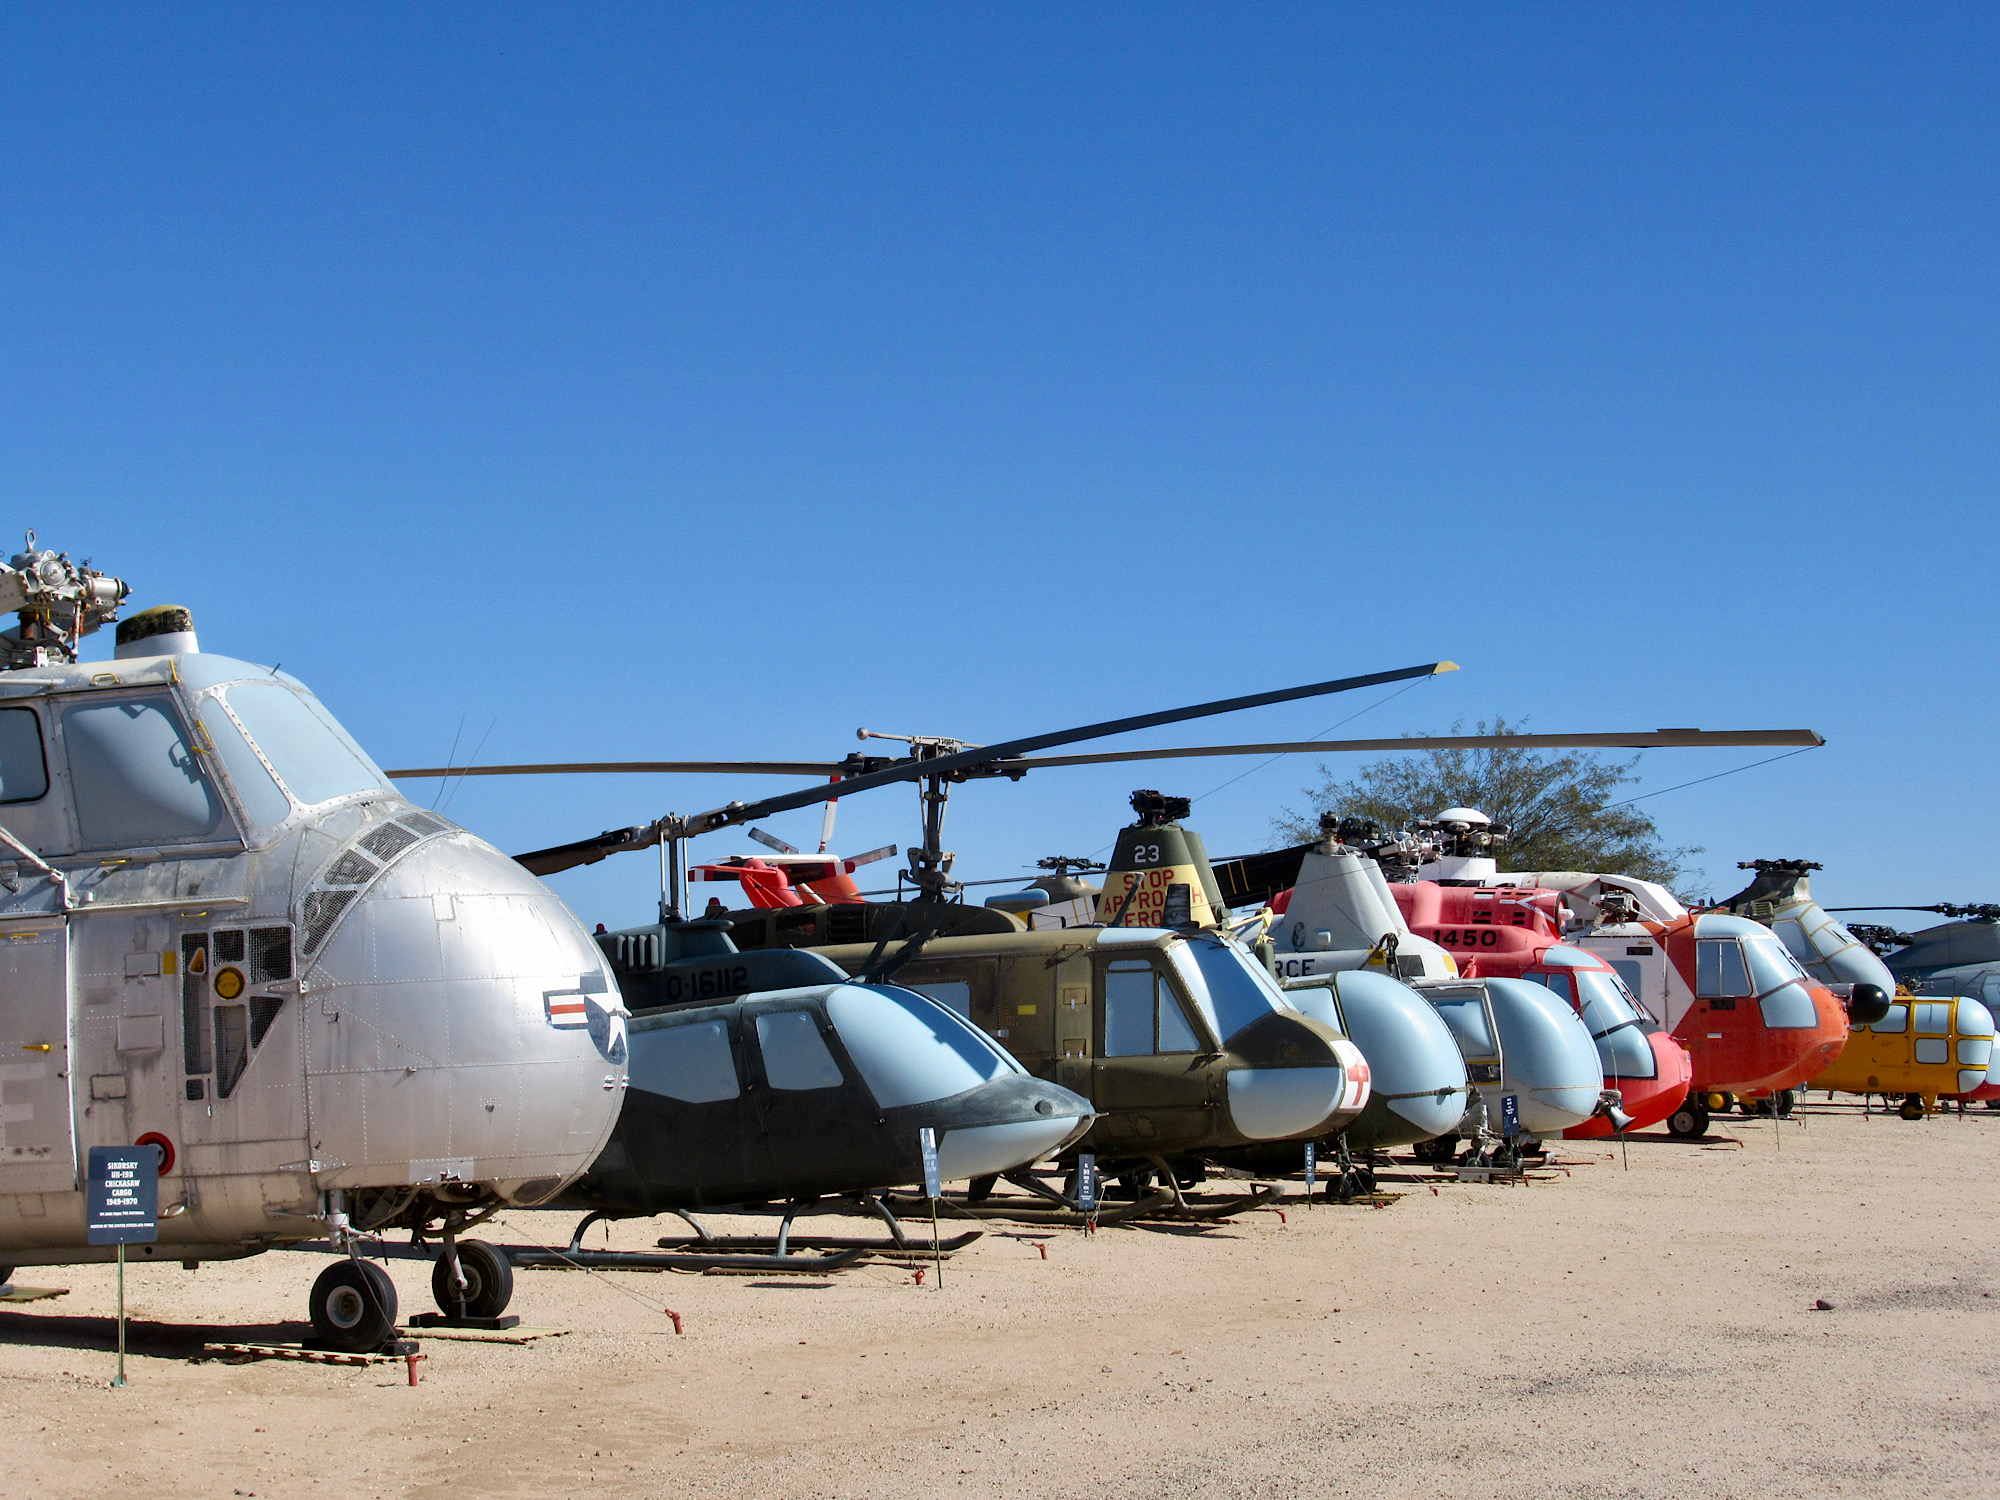 Row of multi-coloured and various-sized helicopters under blue sky.